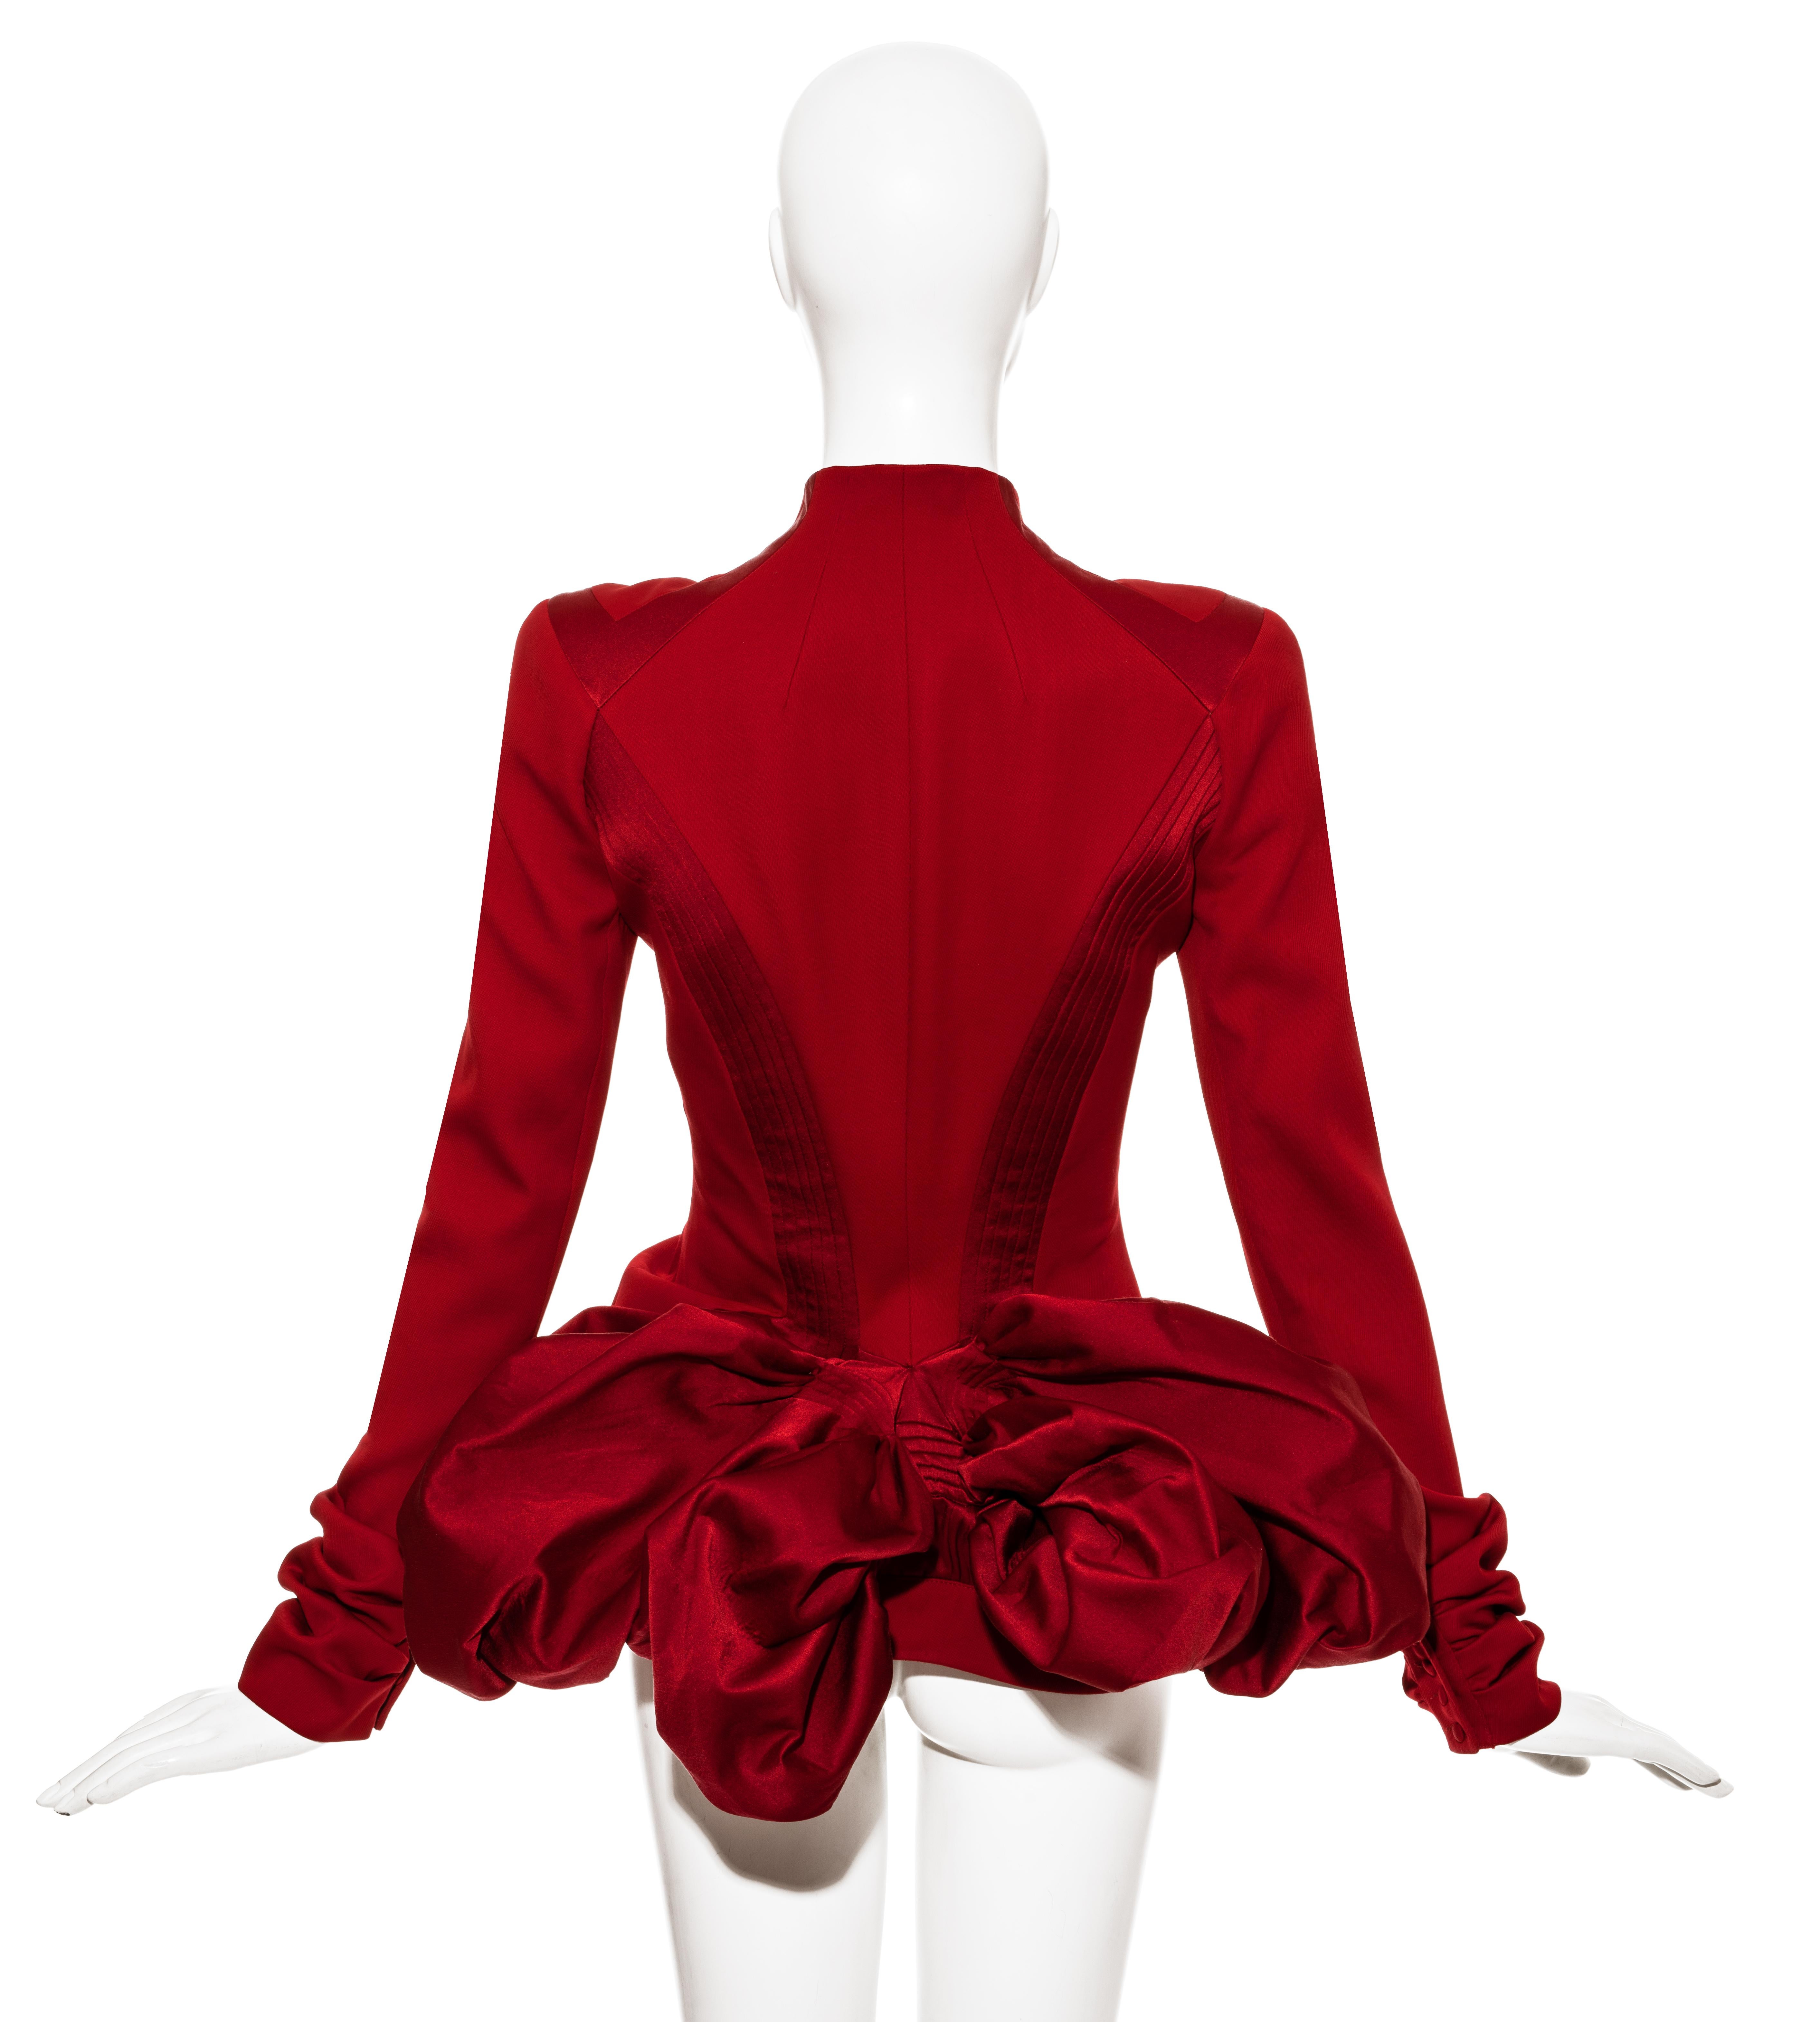 John Galliano red wool evening jacket with voluminous bustle, bias cut satin panels, fabric covered buttons, and ruched seams around hips and cuffs. 

Fall-Winter 2003